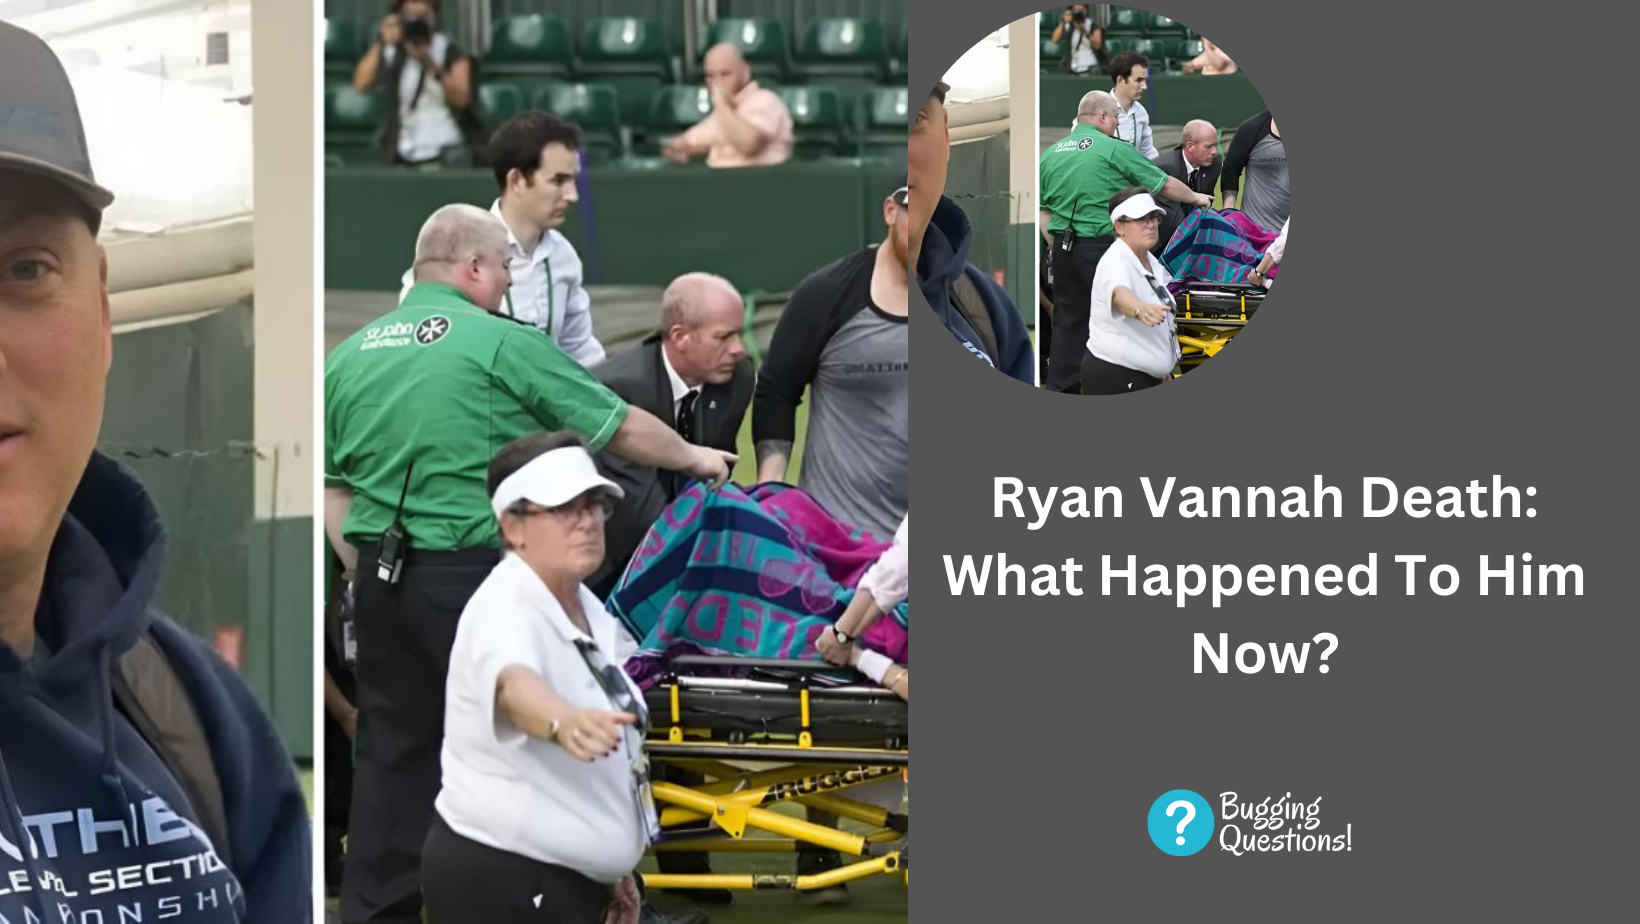 Ryan Vannah Death: What Happened To Him Now?